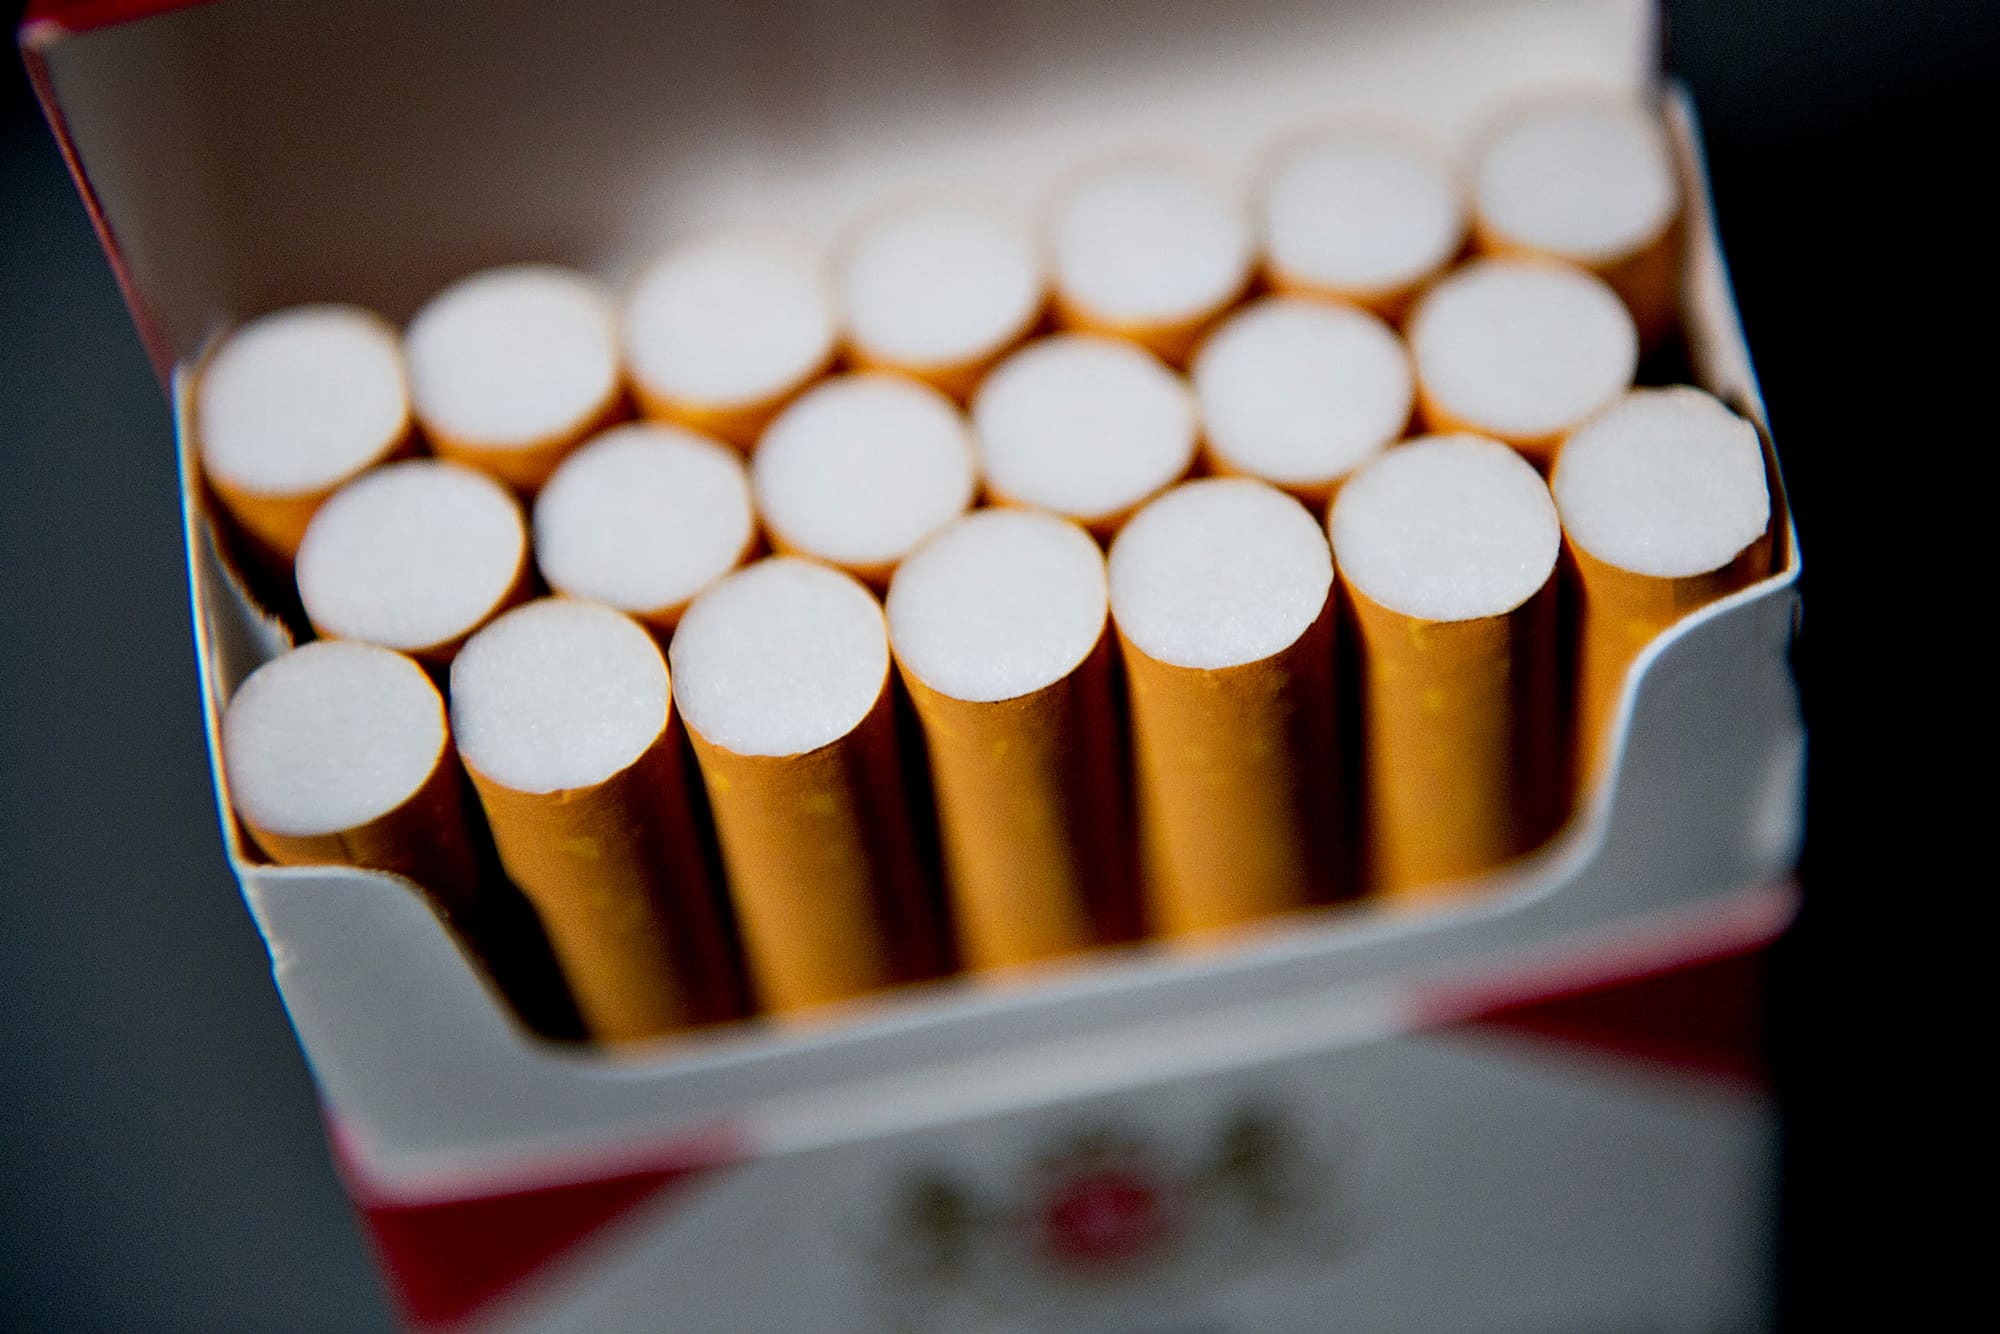 Marlboro maker Altria said cigarette industry shipments flattened in 2020 after years of declines